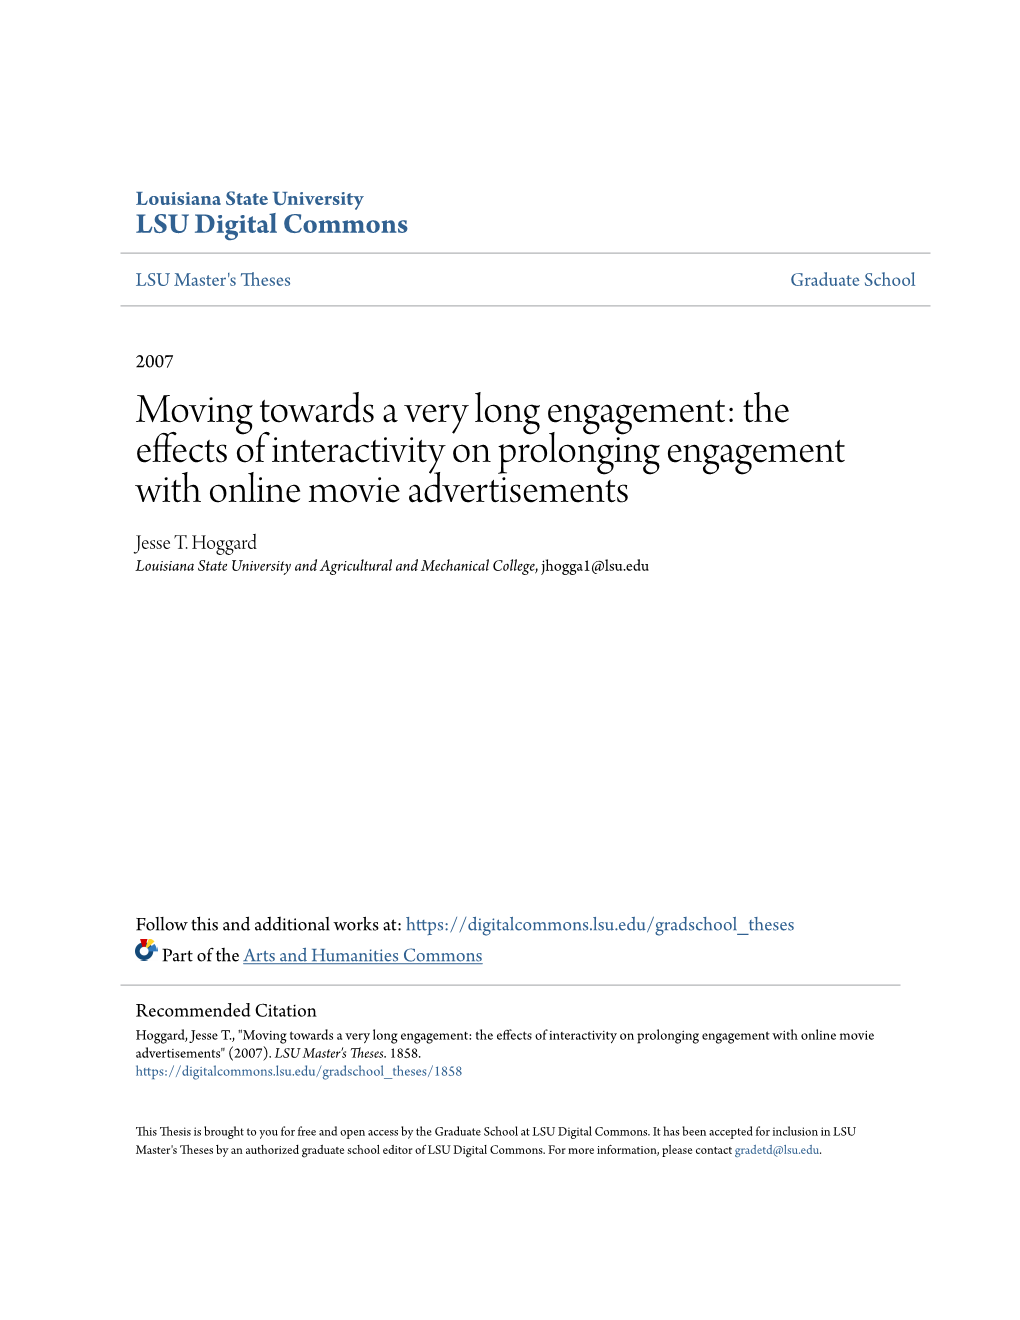 Moving Towards a Very Long Engagement: the Effects of Interactivity on Prolonging Engagement with Online Movie Advertisements Jesse T